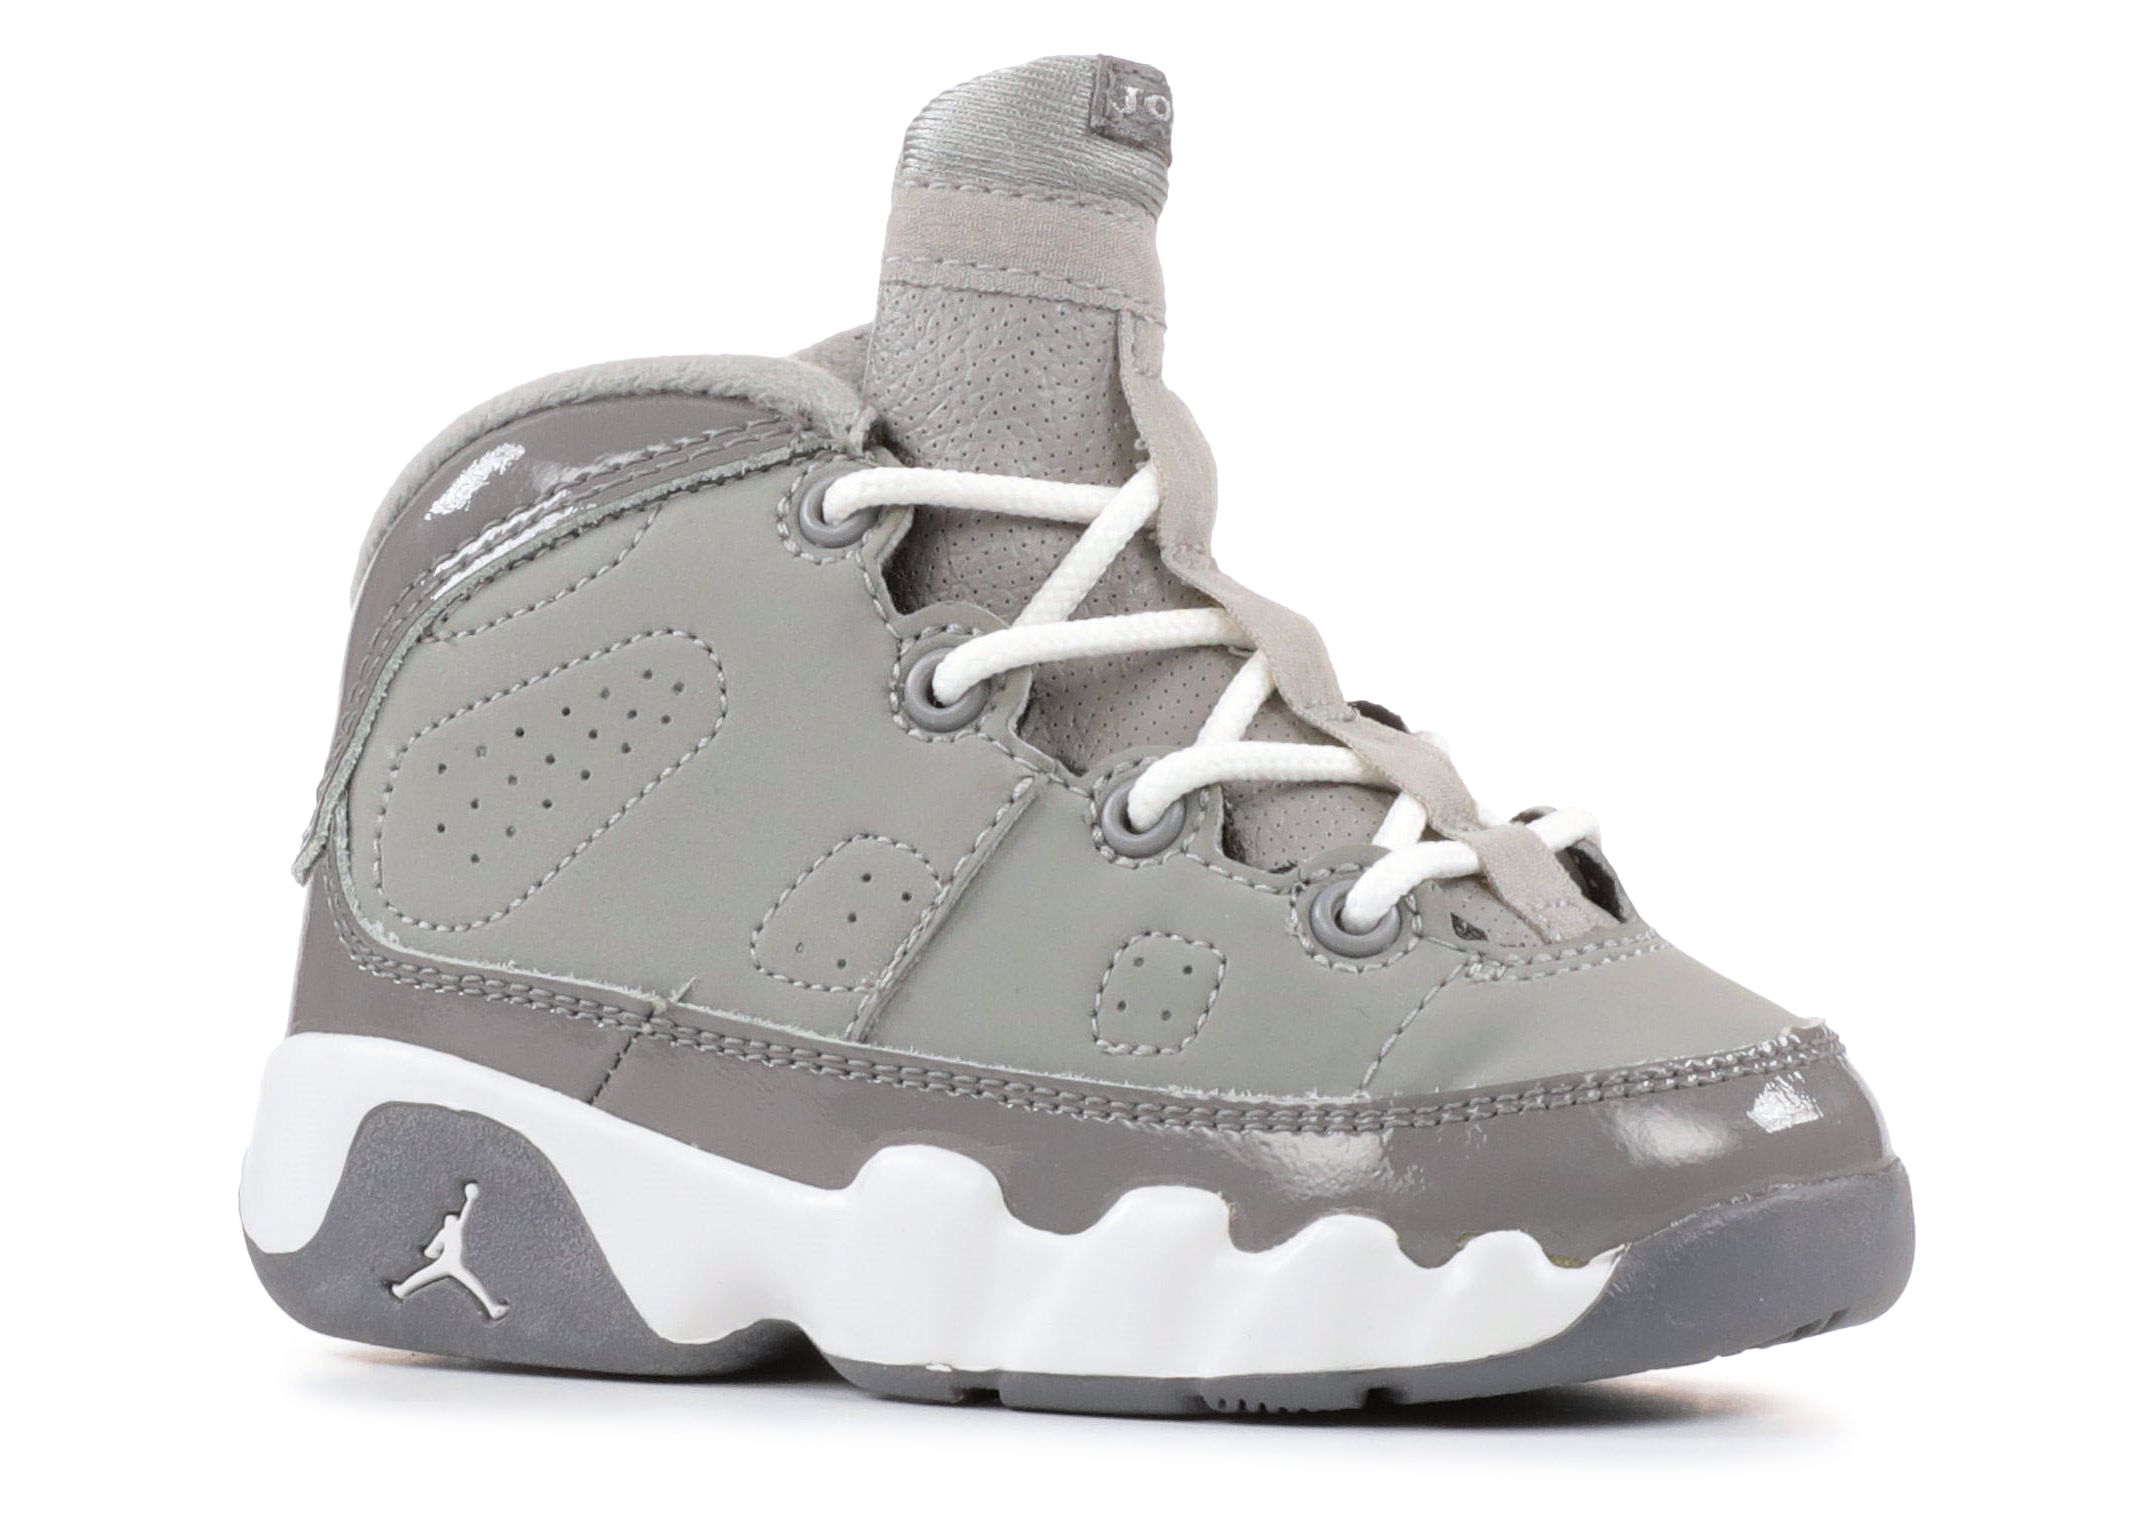 gray and baby blue jordans